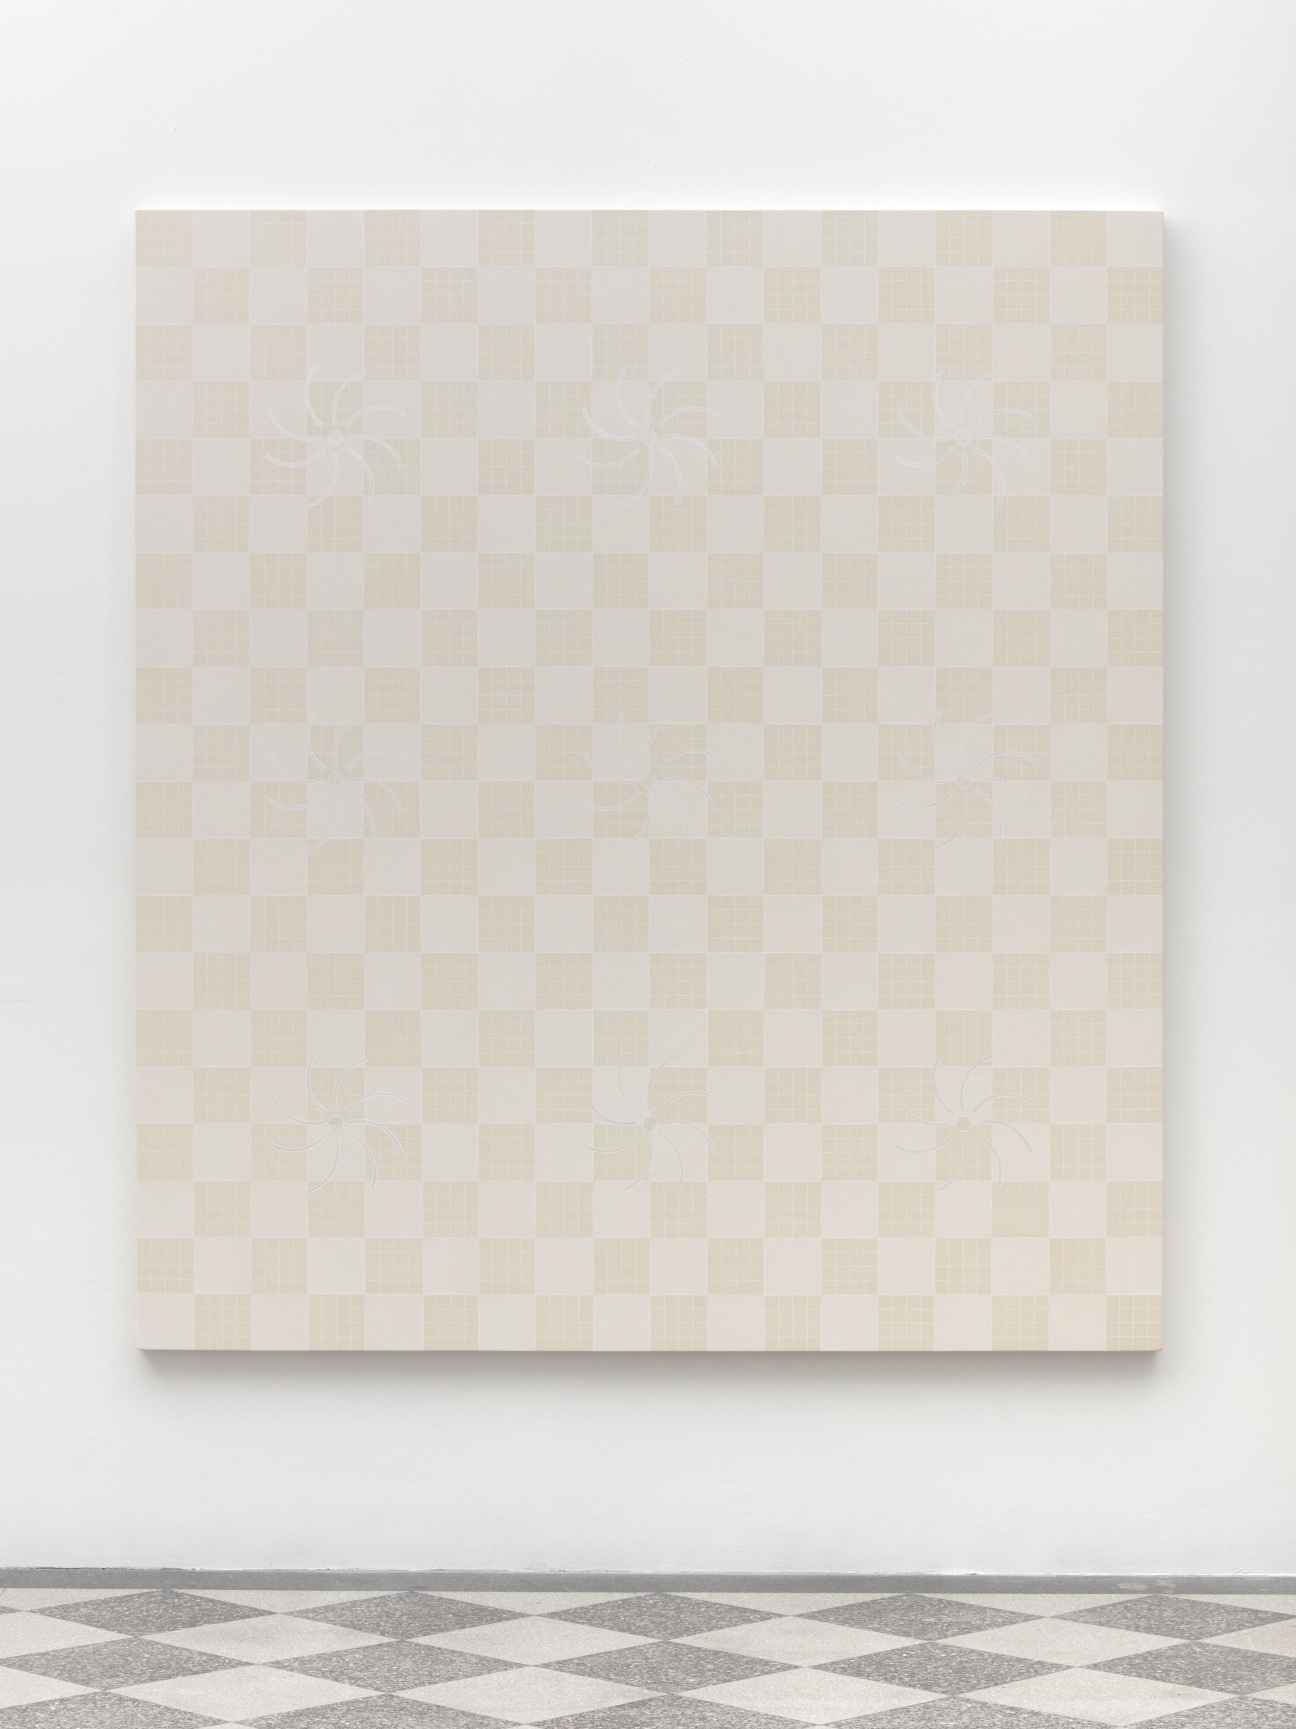 Minimalist painting of white and tan checkerboard.